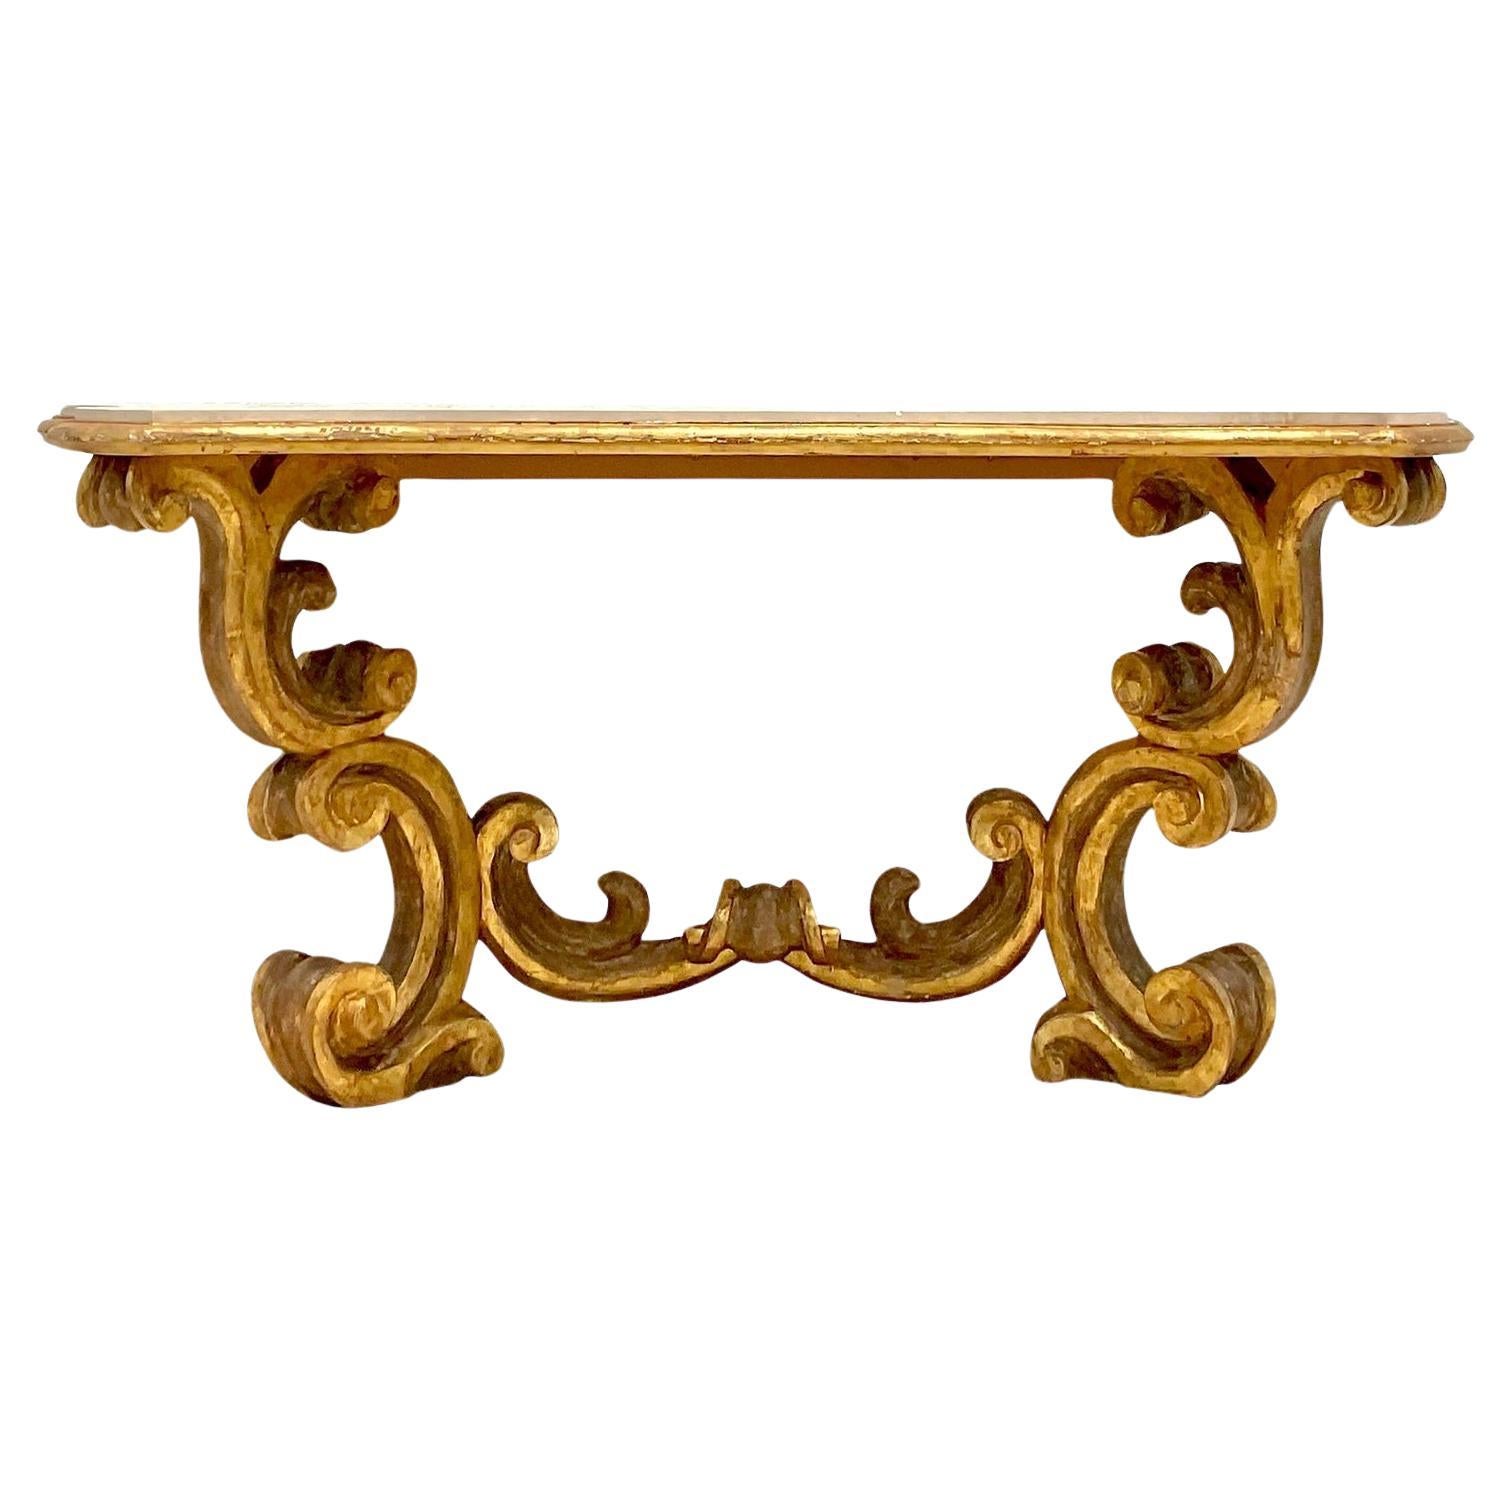 Mid 20th Century Vintage Rococo Gilt Wall Mount Console Table